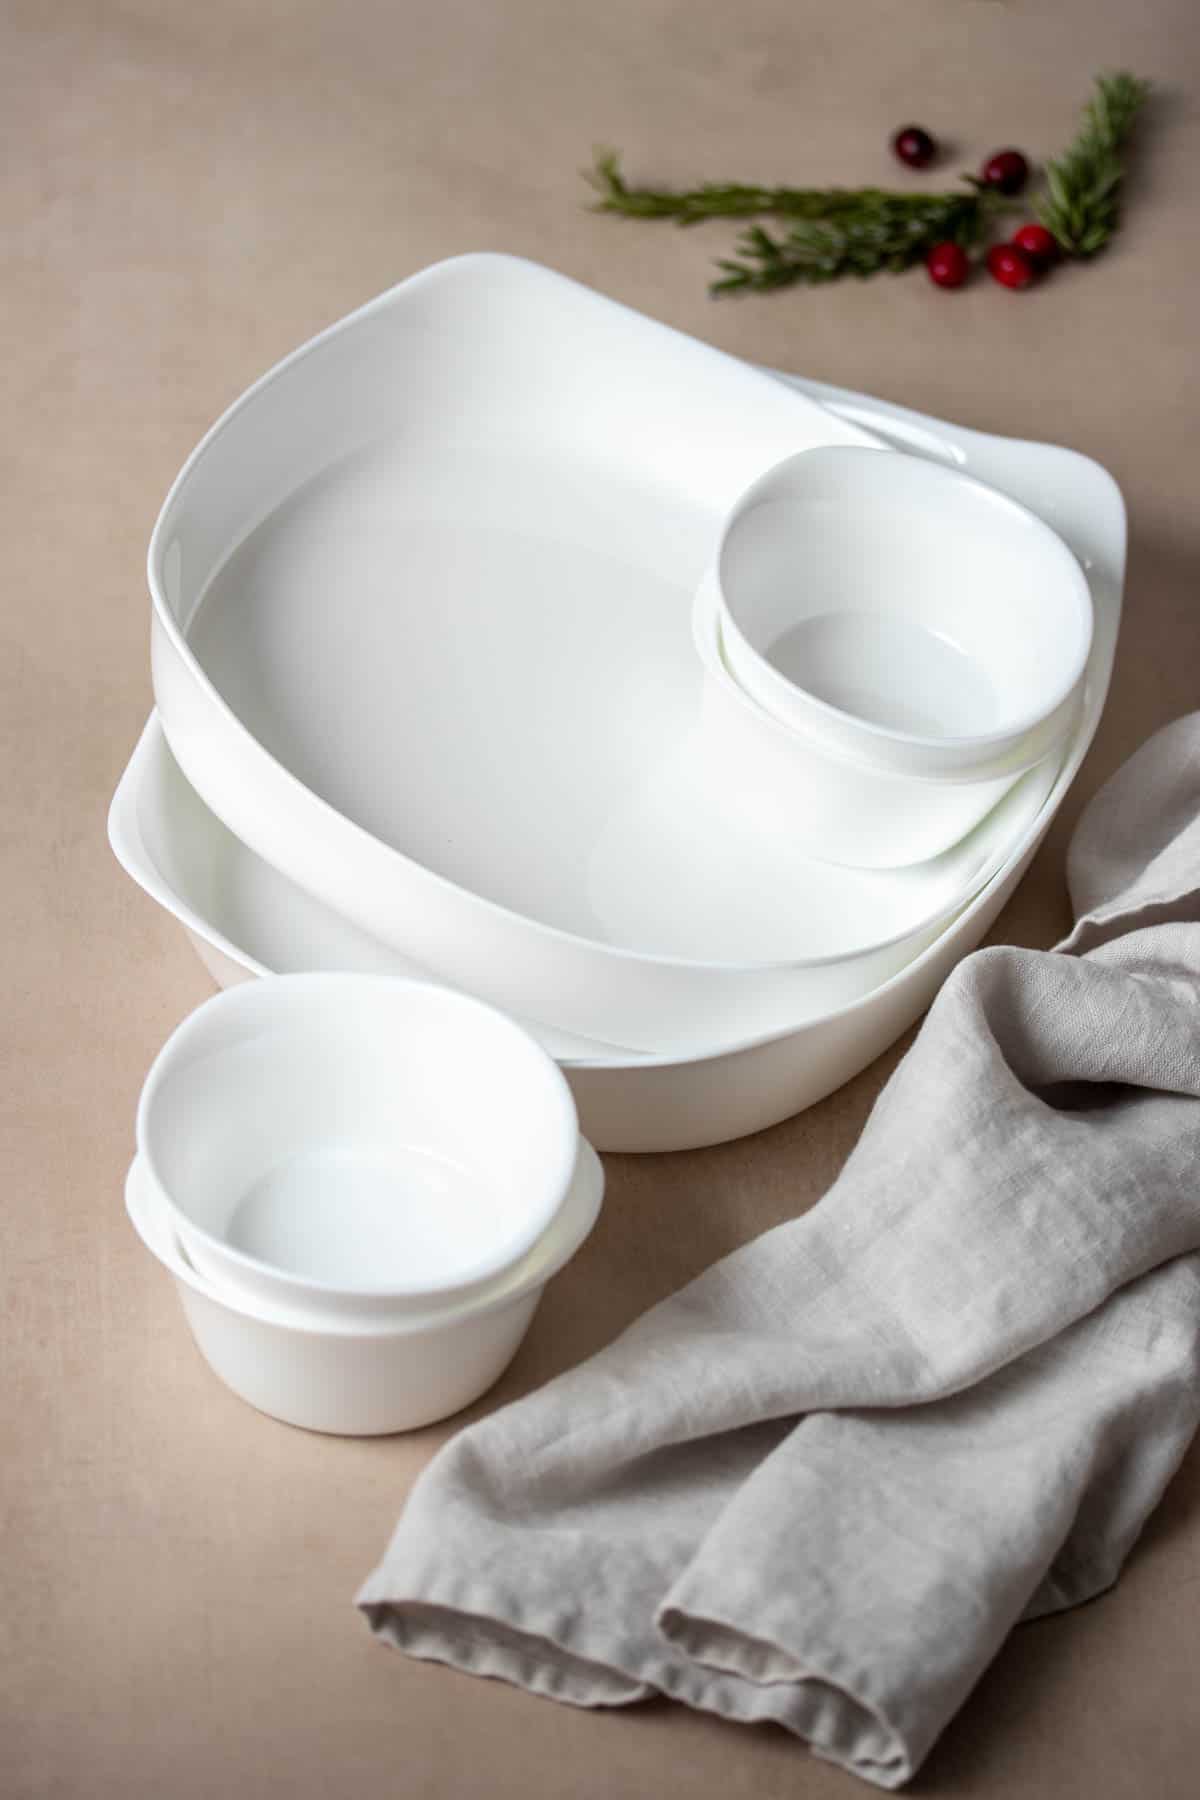 A variety of white baking pans in small to large stacked on a tan colored surface with a grey towel next to them.